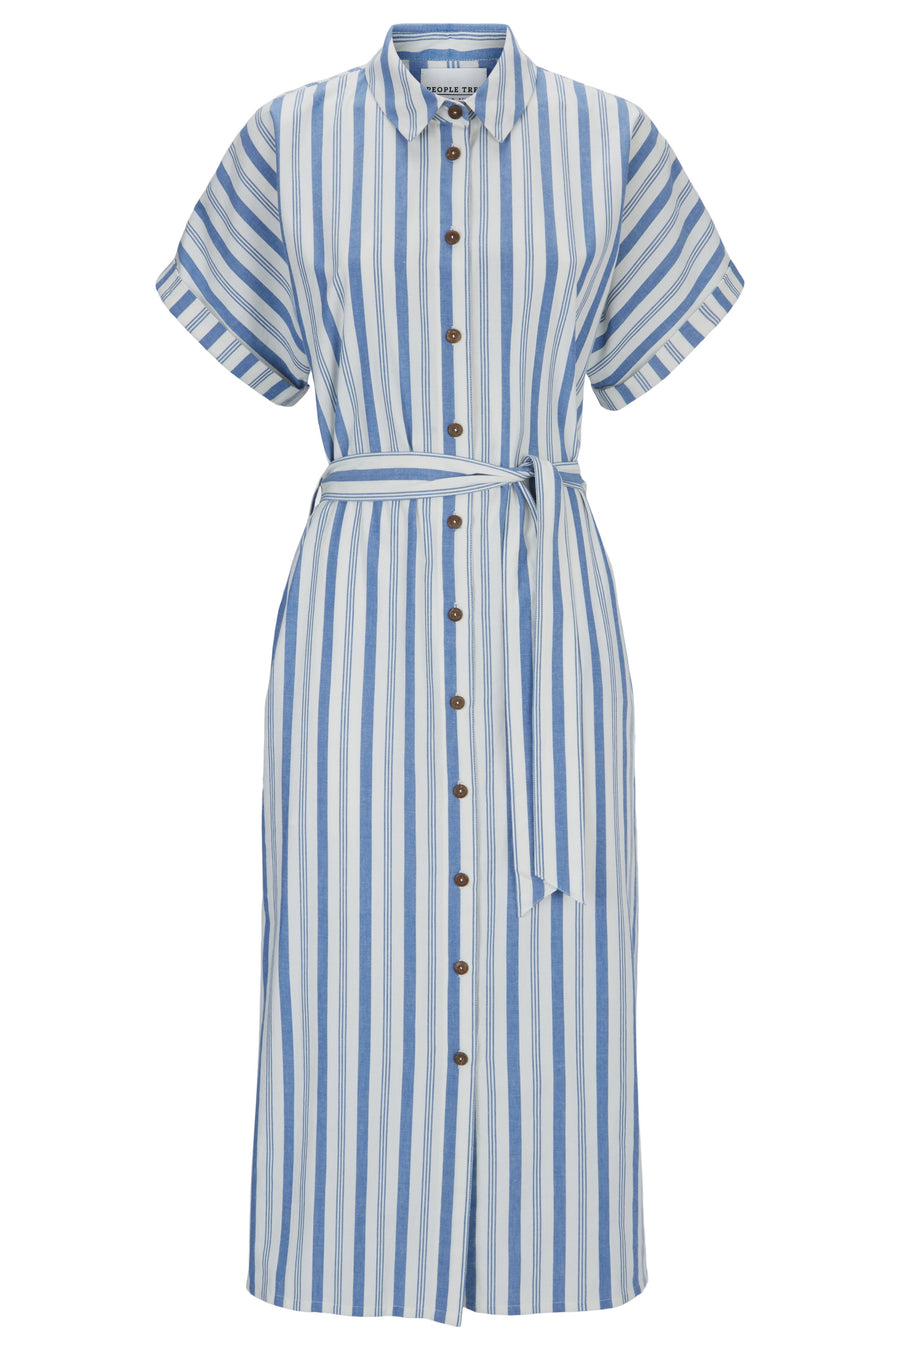 People Tree Fair Trade, Ethical & Sustainable Bessie Striped Dress in Blue stripe 100% Organic Cotton